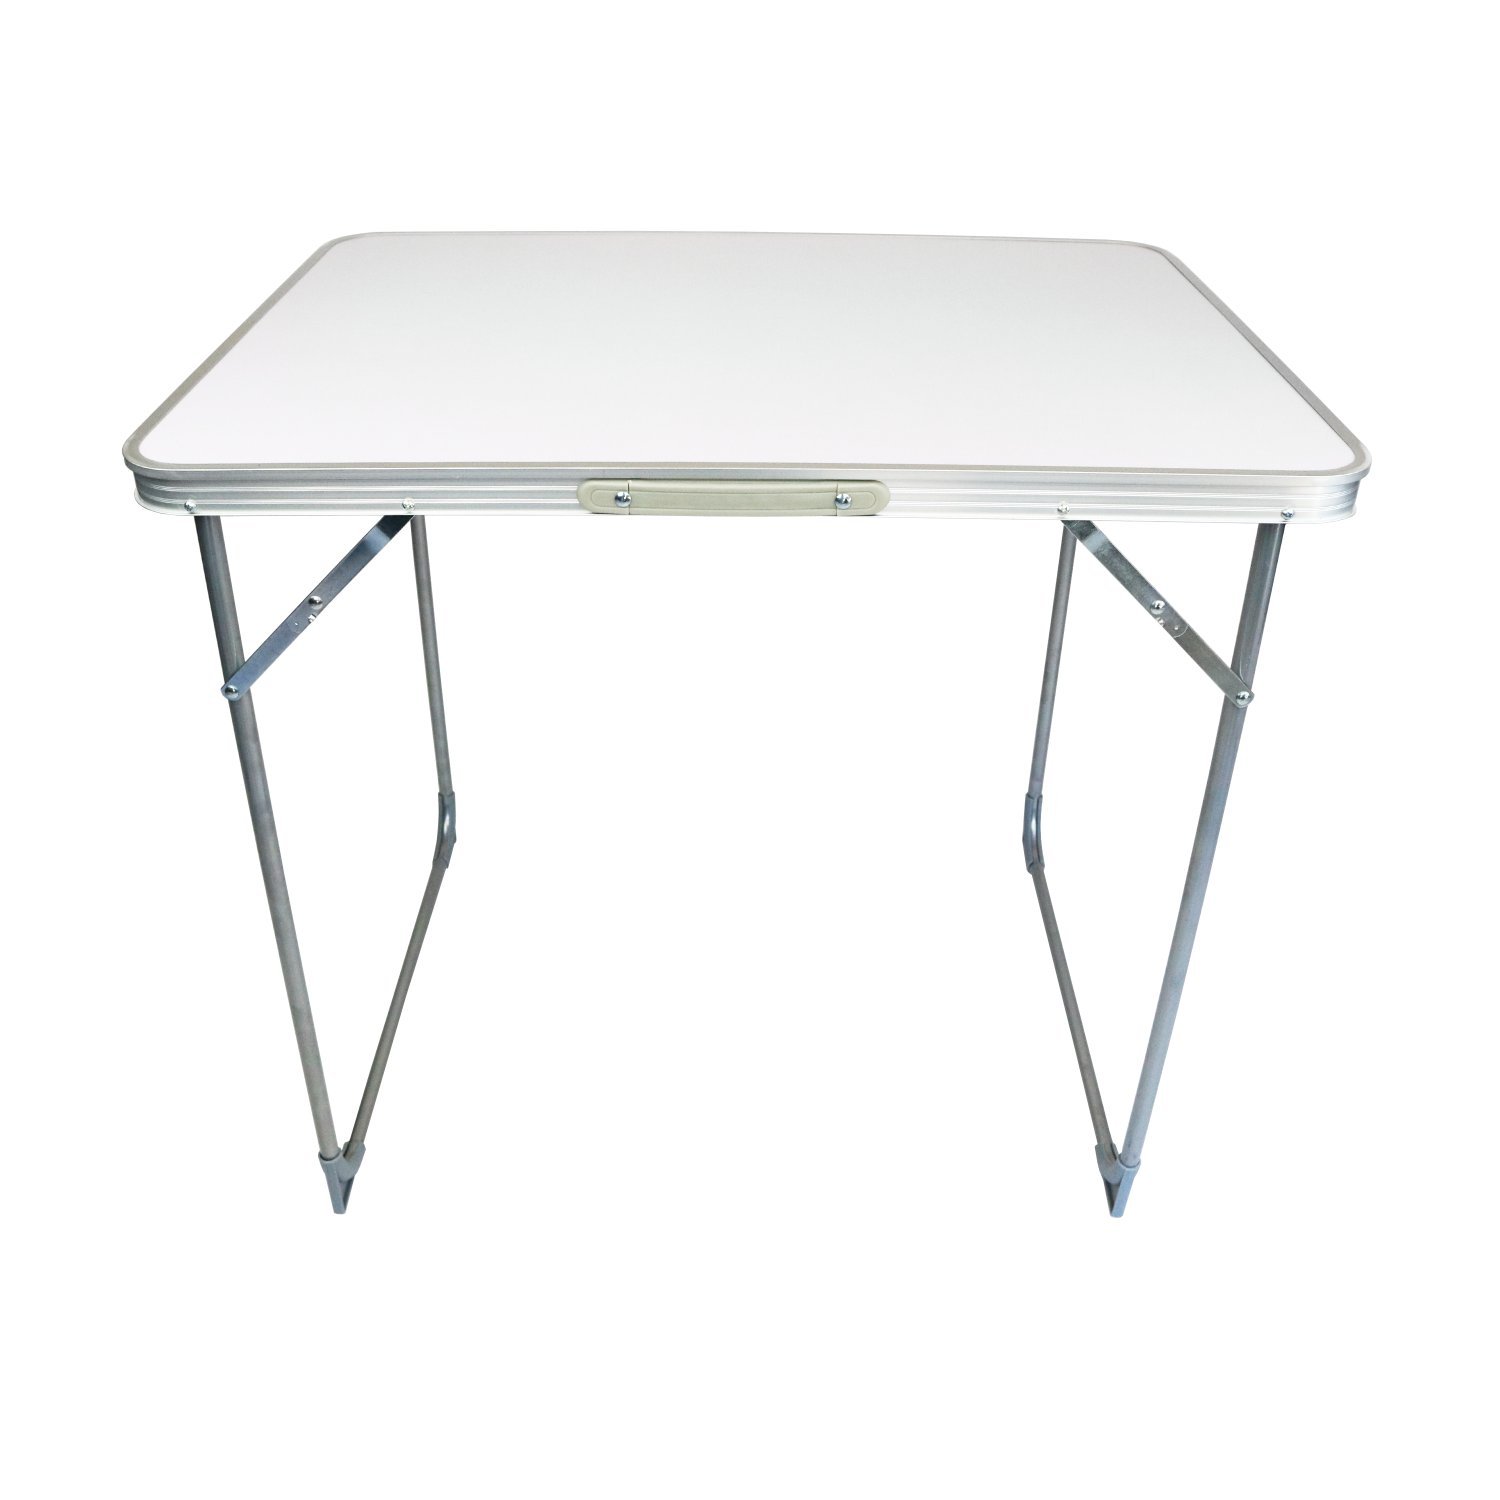 80cm Portable Folding Outdoor Camping Kitchen Work Top Table - £23.99 ...